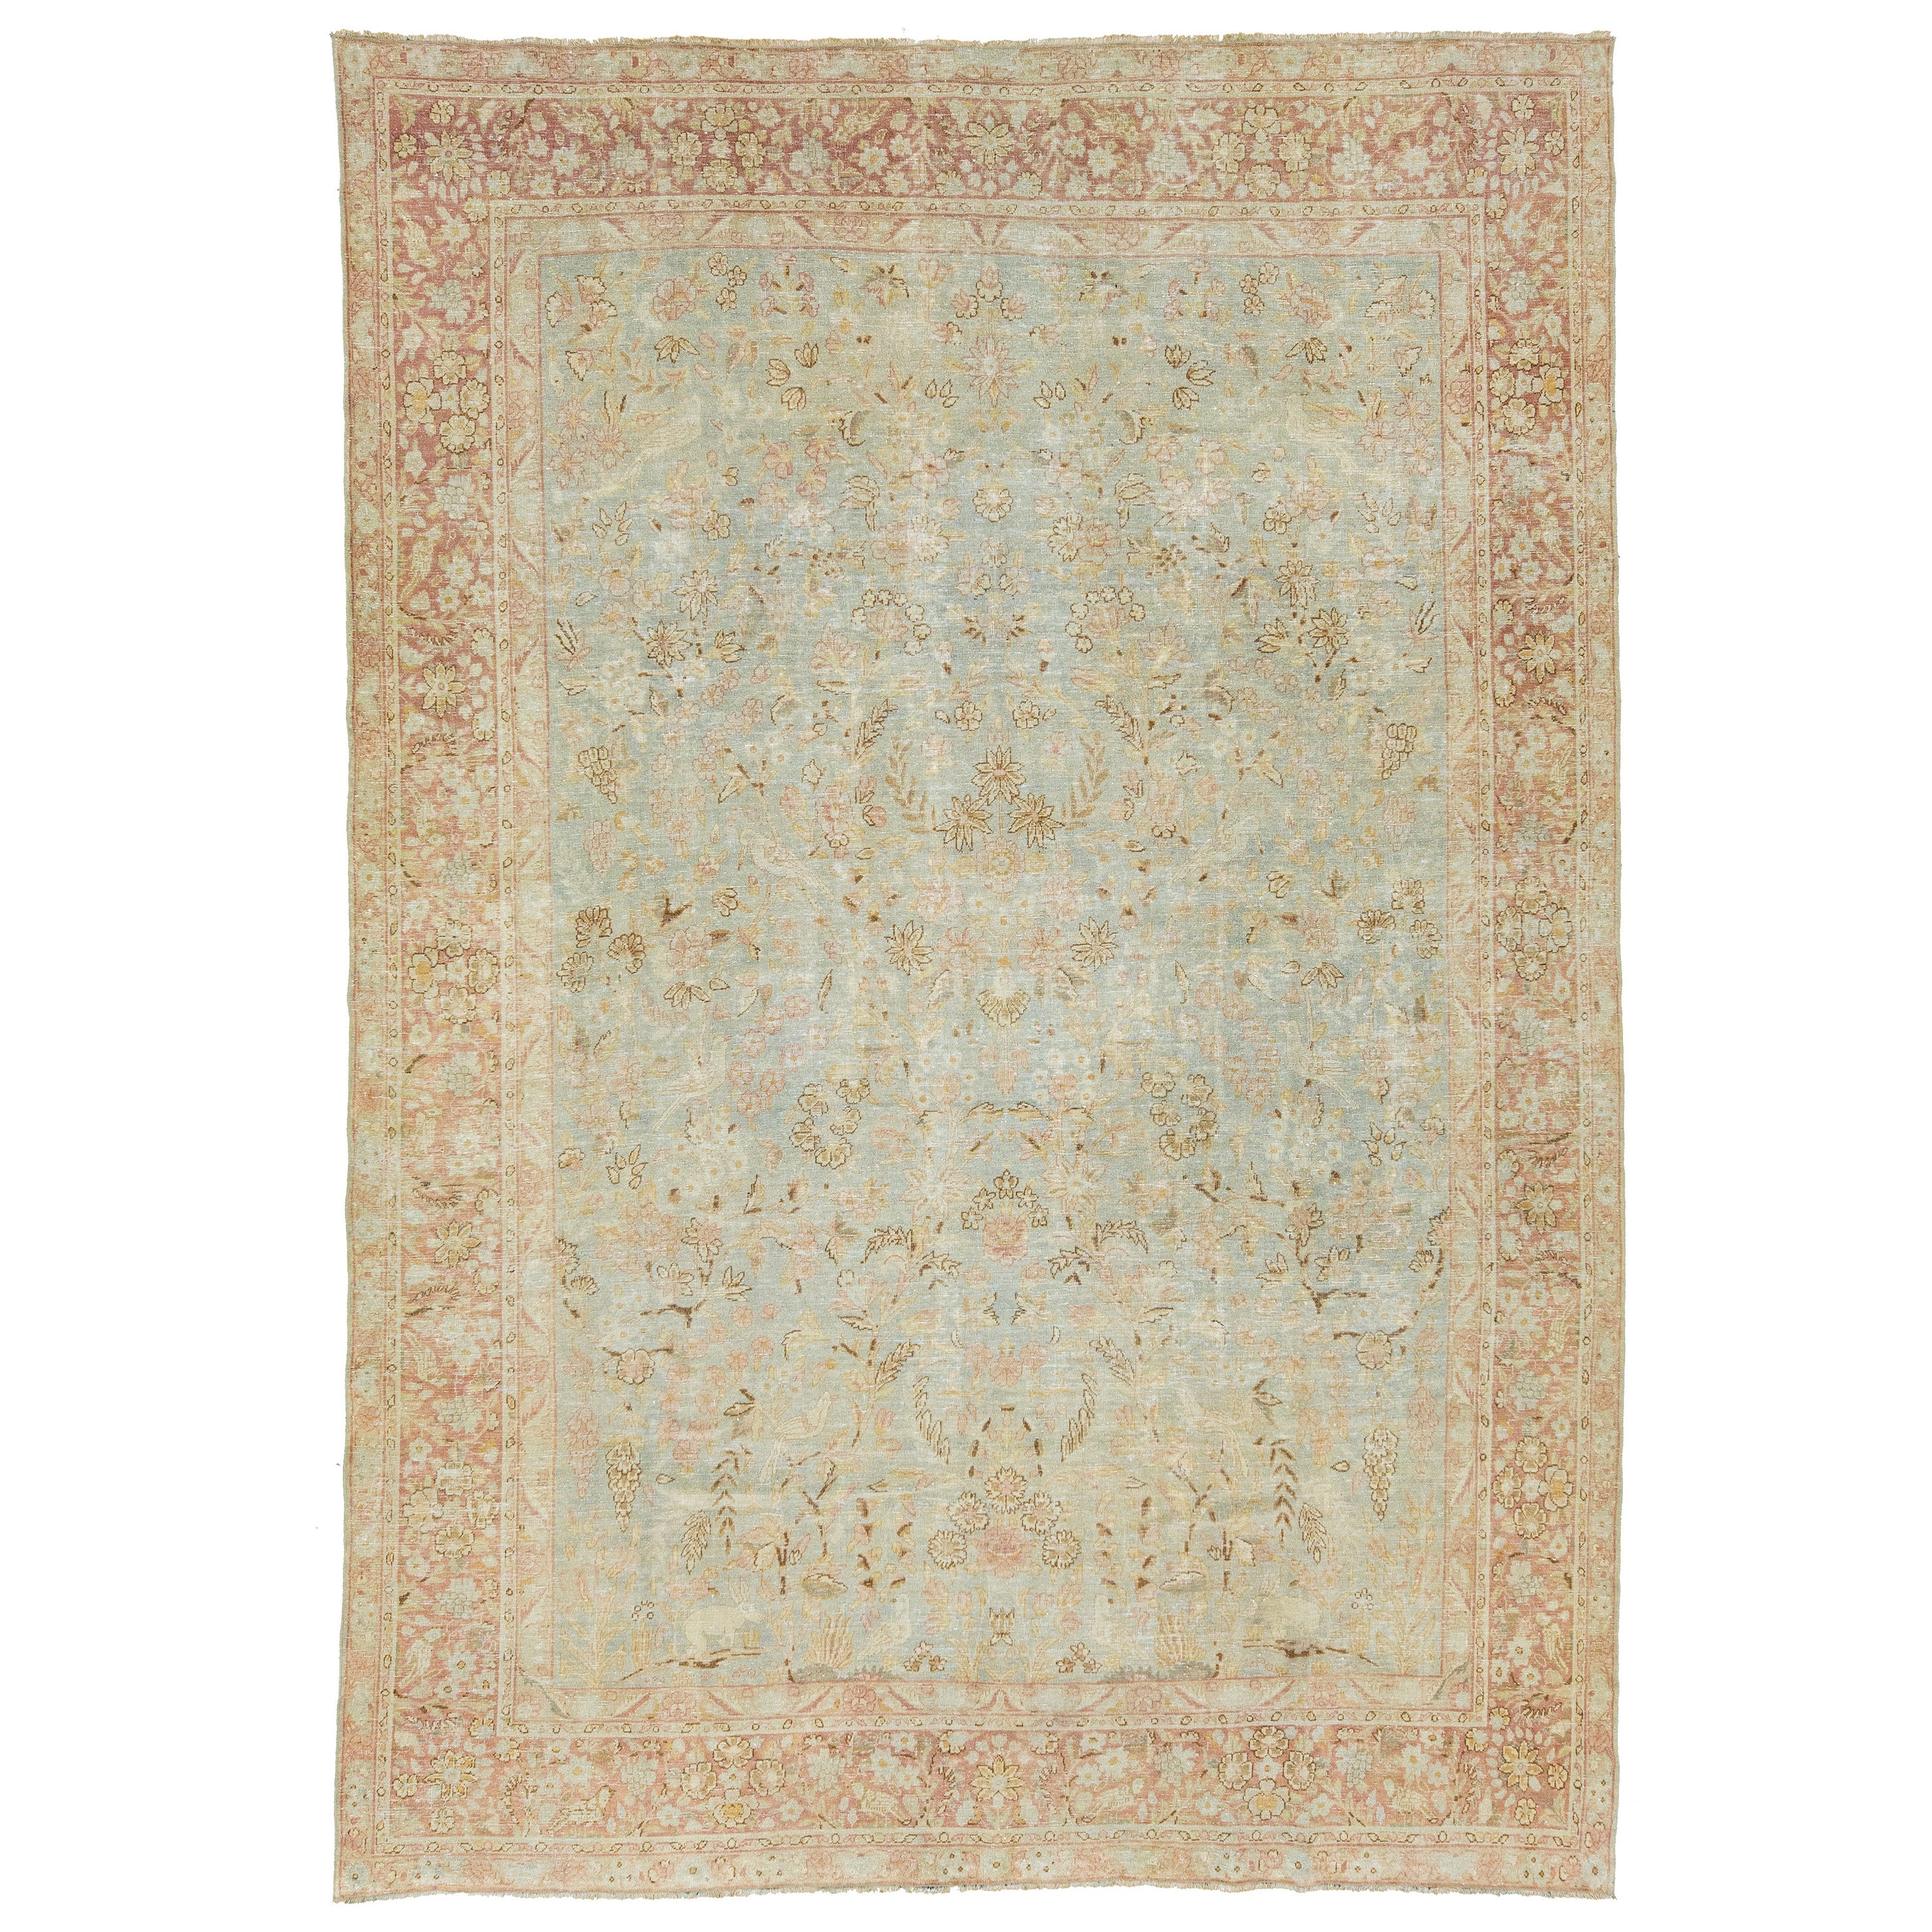 Light Blue Persian Antique Malyer Handmade Wool Rug with Floral Design For Sale